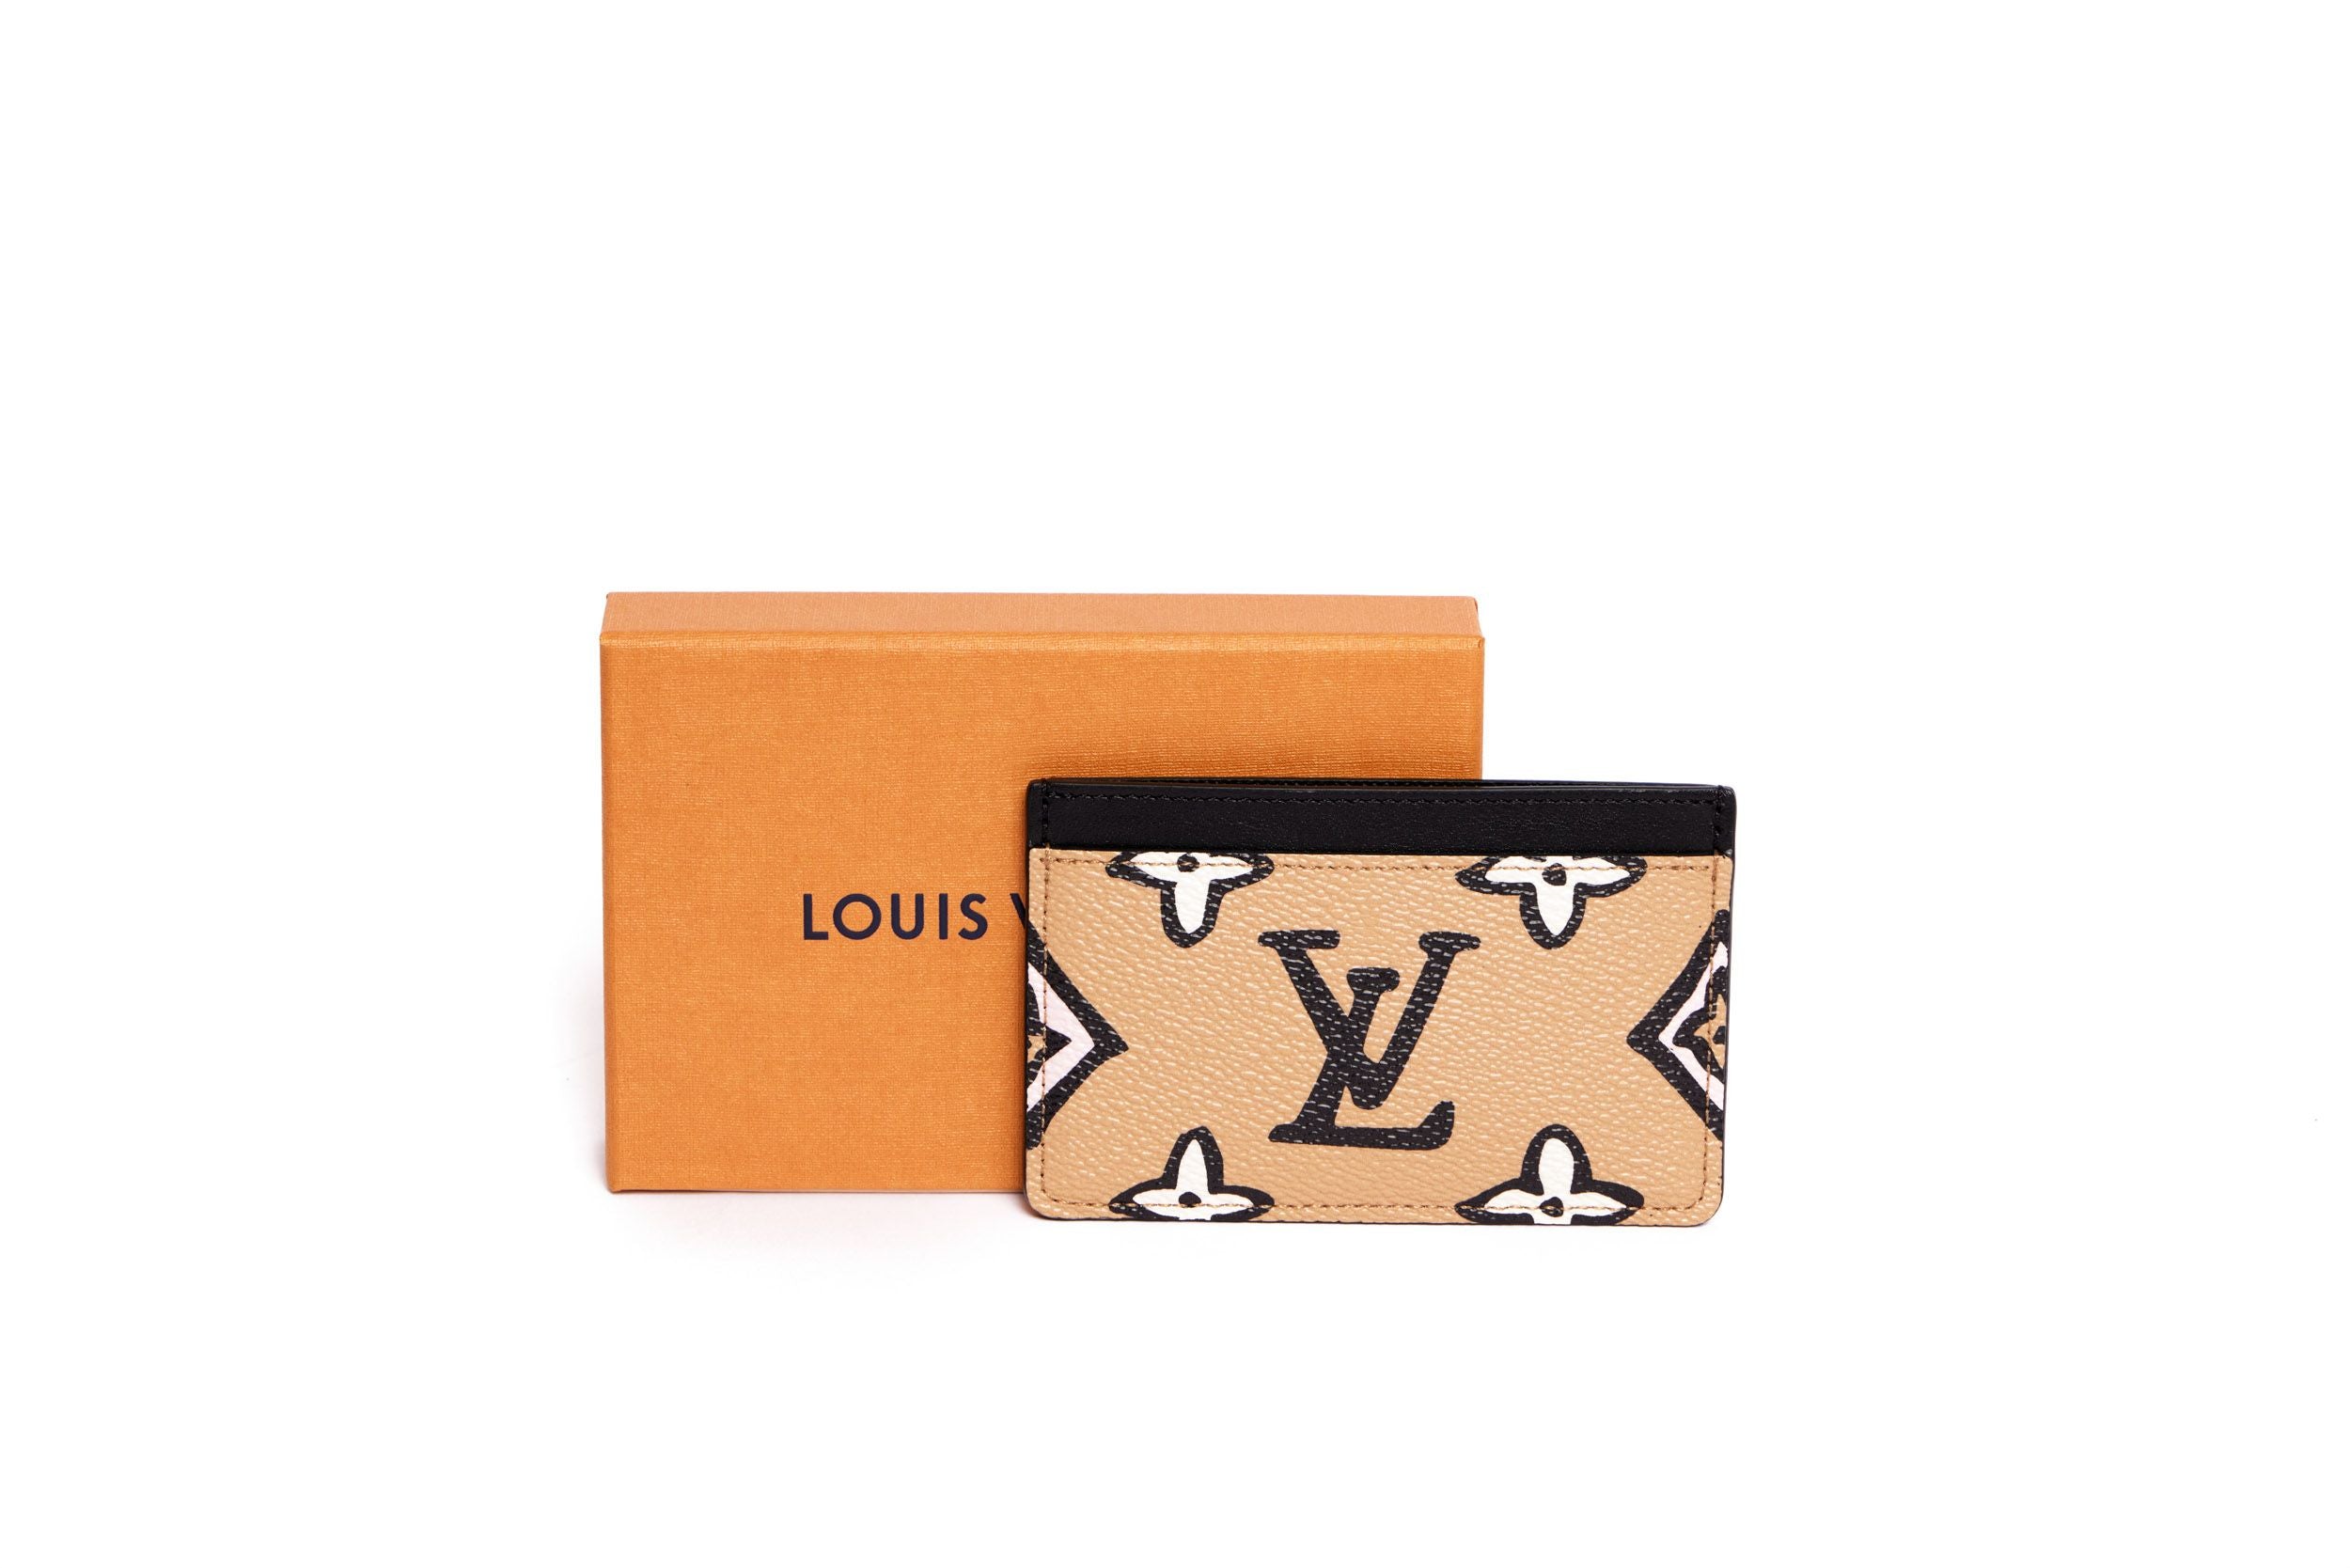 Vintage Louis Vuitton Monogram 4 Key Holder Wallet  Curated by Charbel